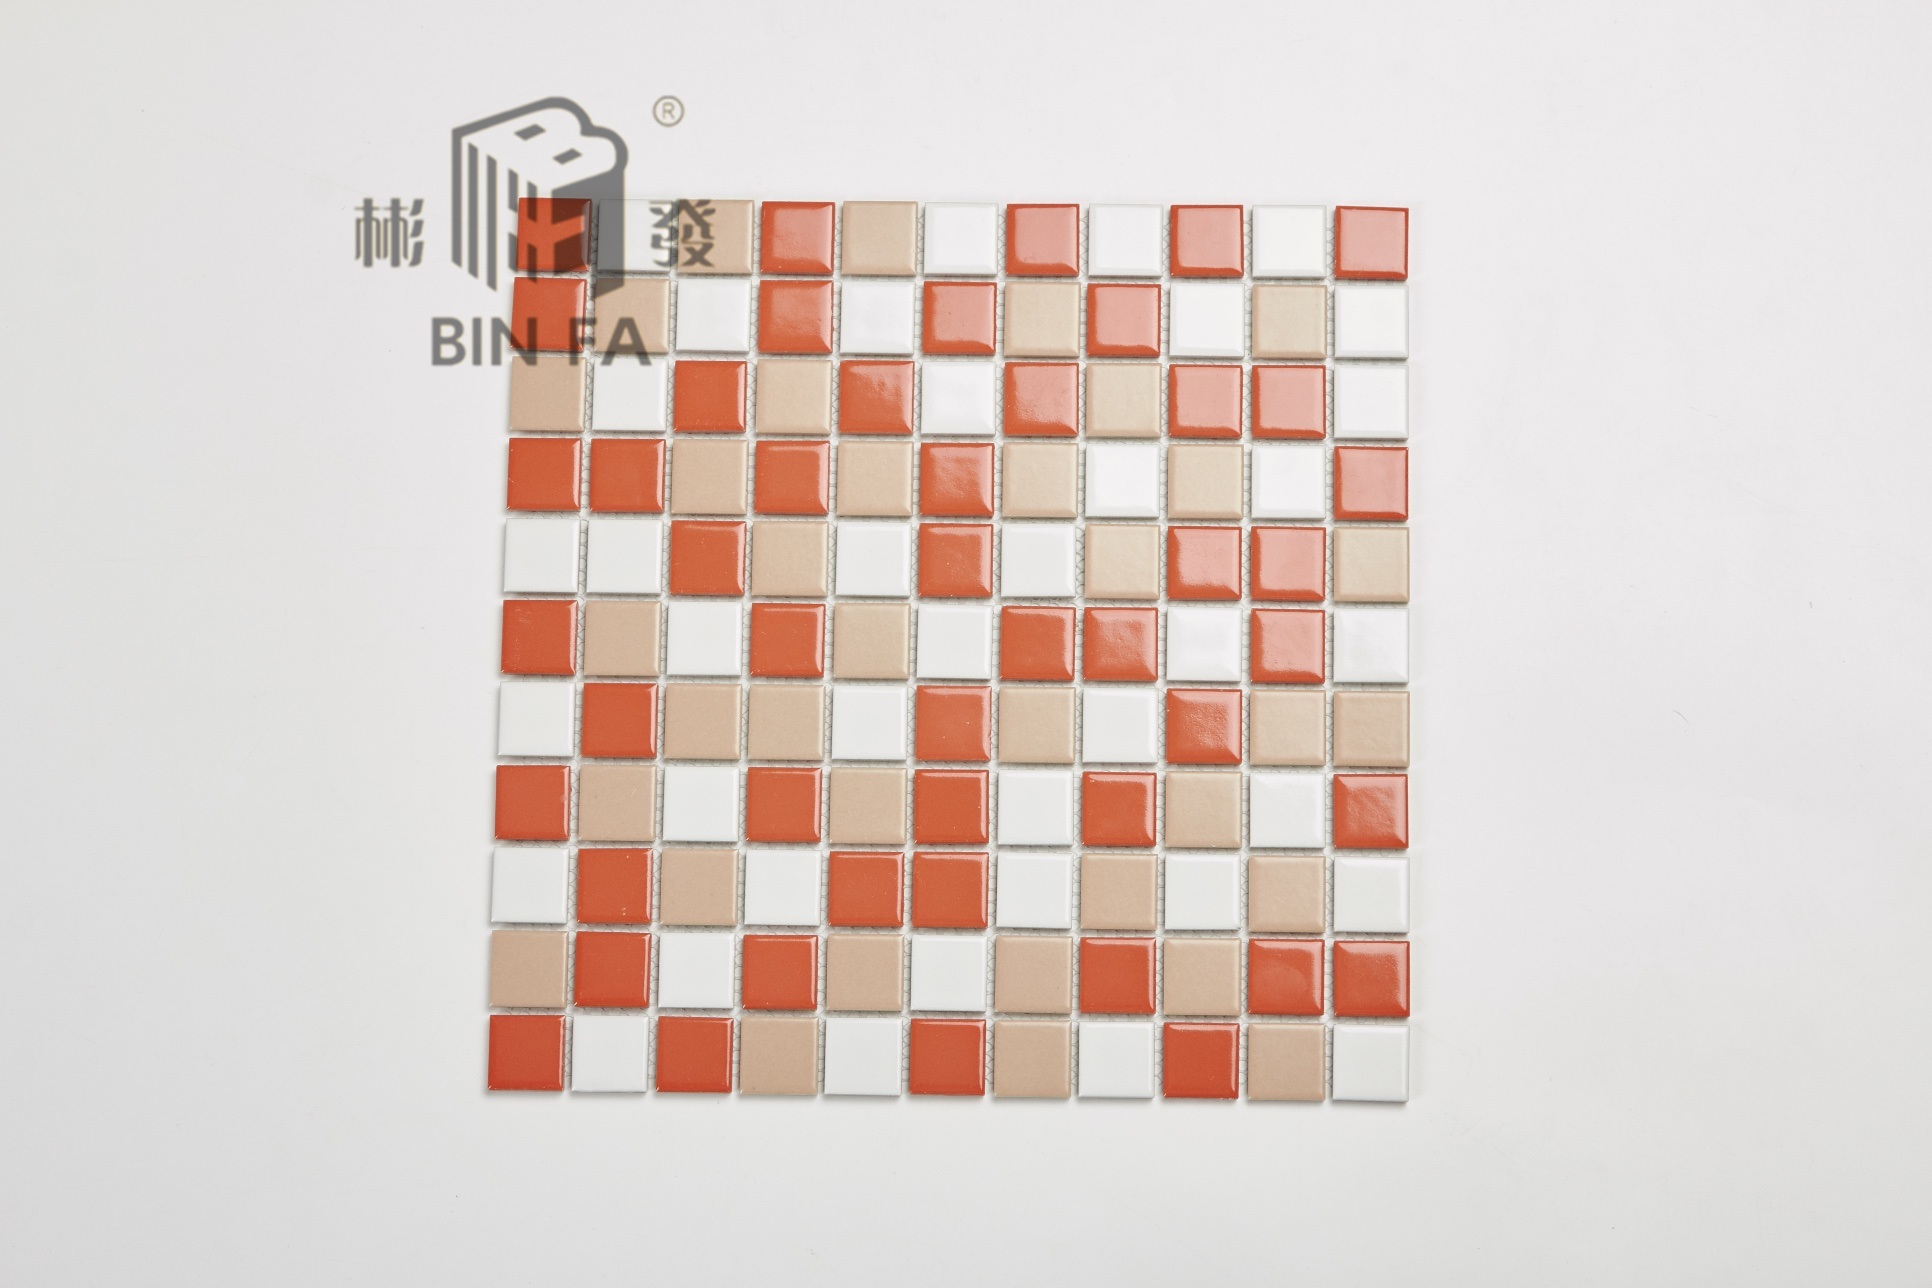 23*23mm Colorful (orange, red, yellow, white) Ceramic Mosaic Tile for Wall, Kitchen, Bathroom and Swimming Pool, Special Decoration